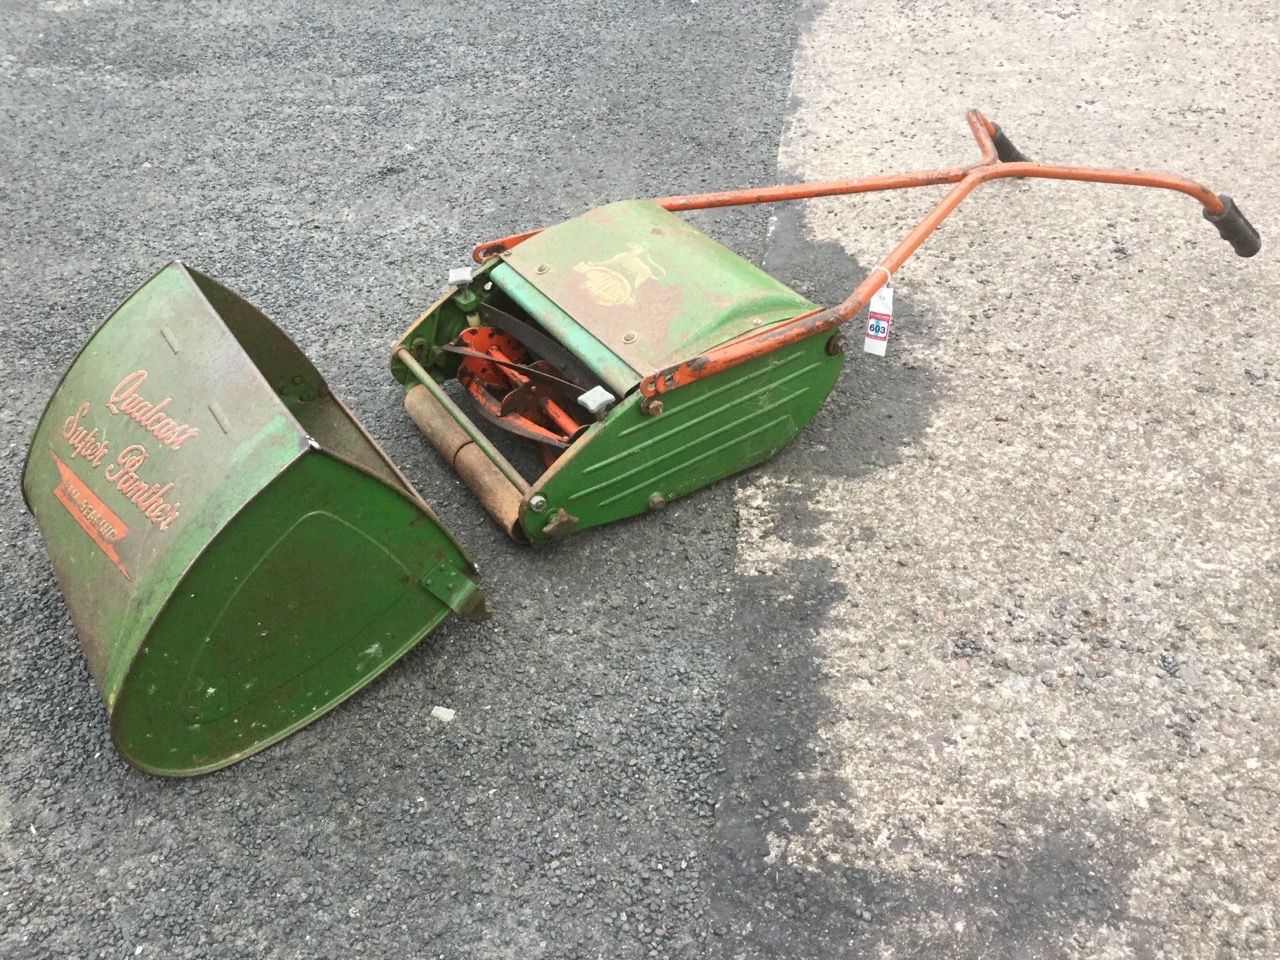 A Qualcast Super Panther push-along lawnmower with wood rollers, grassbox, angled handles, etc.